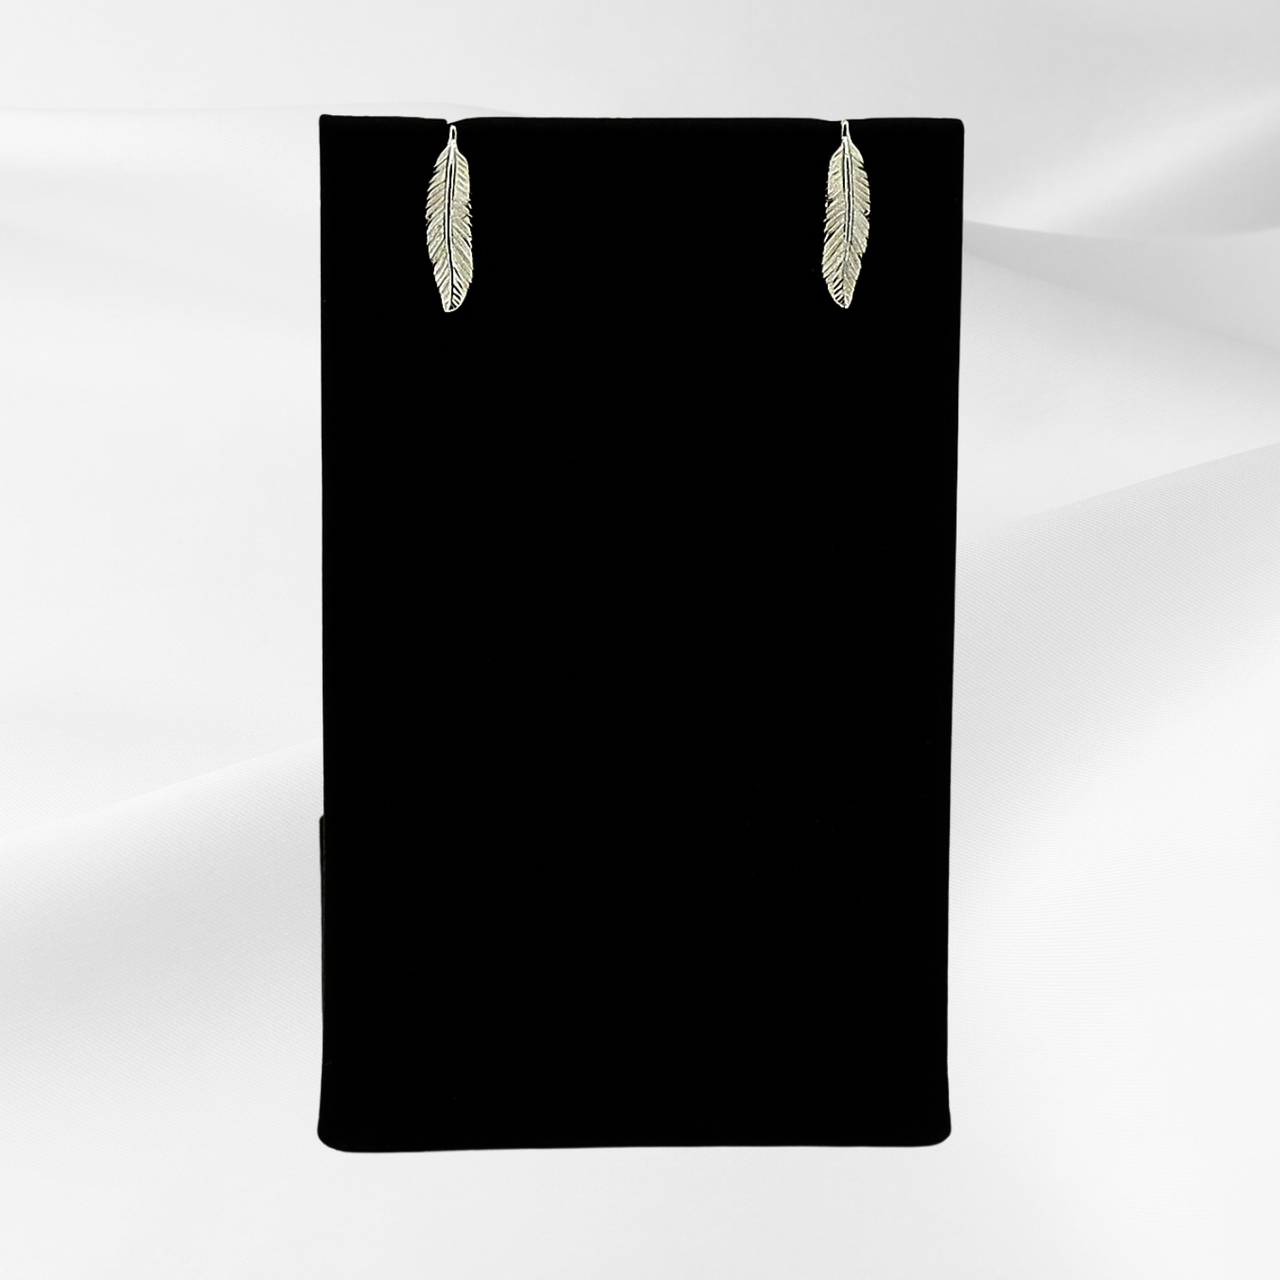 Soar with Joy™ Petite Sterling Silver Earrings front-facing view.